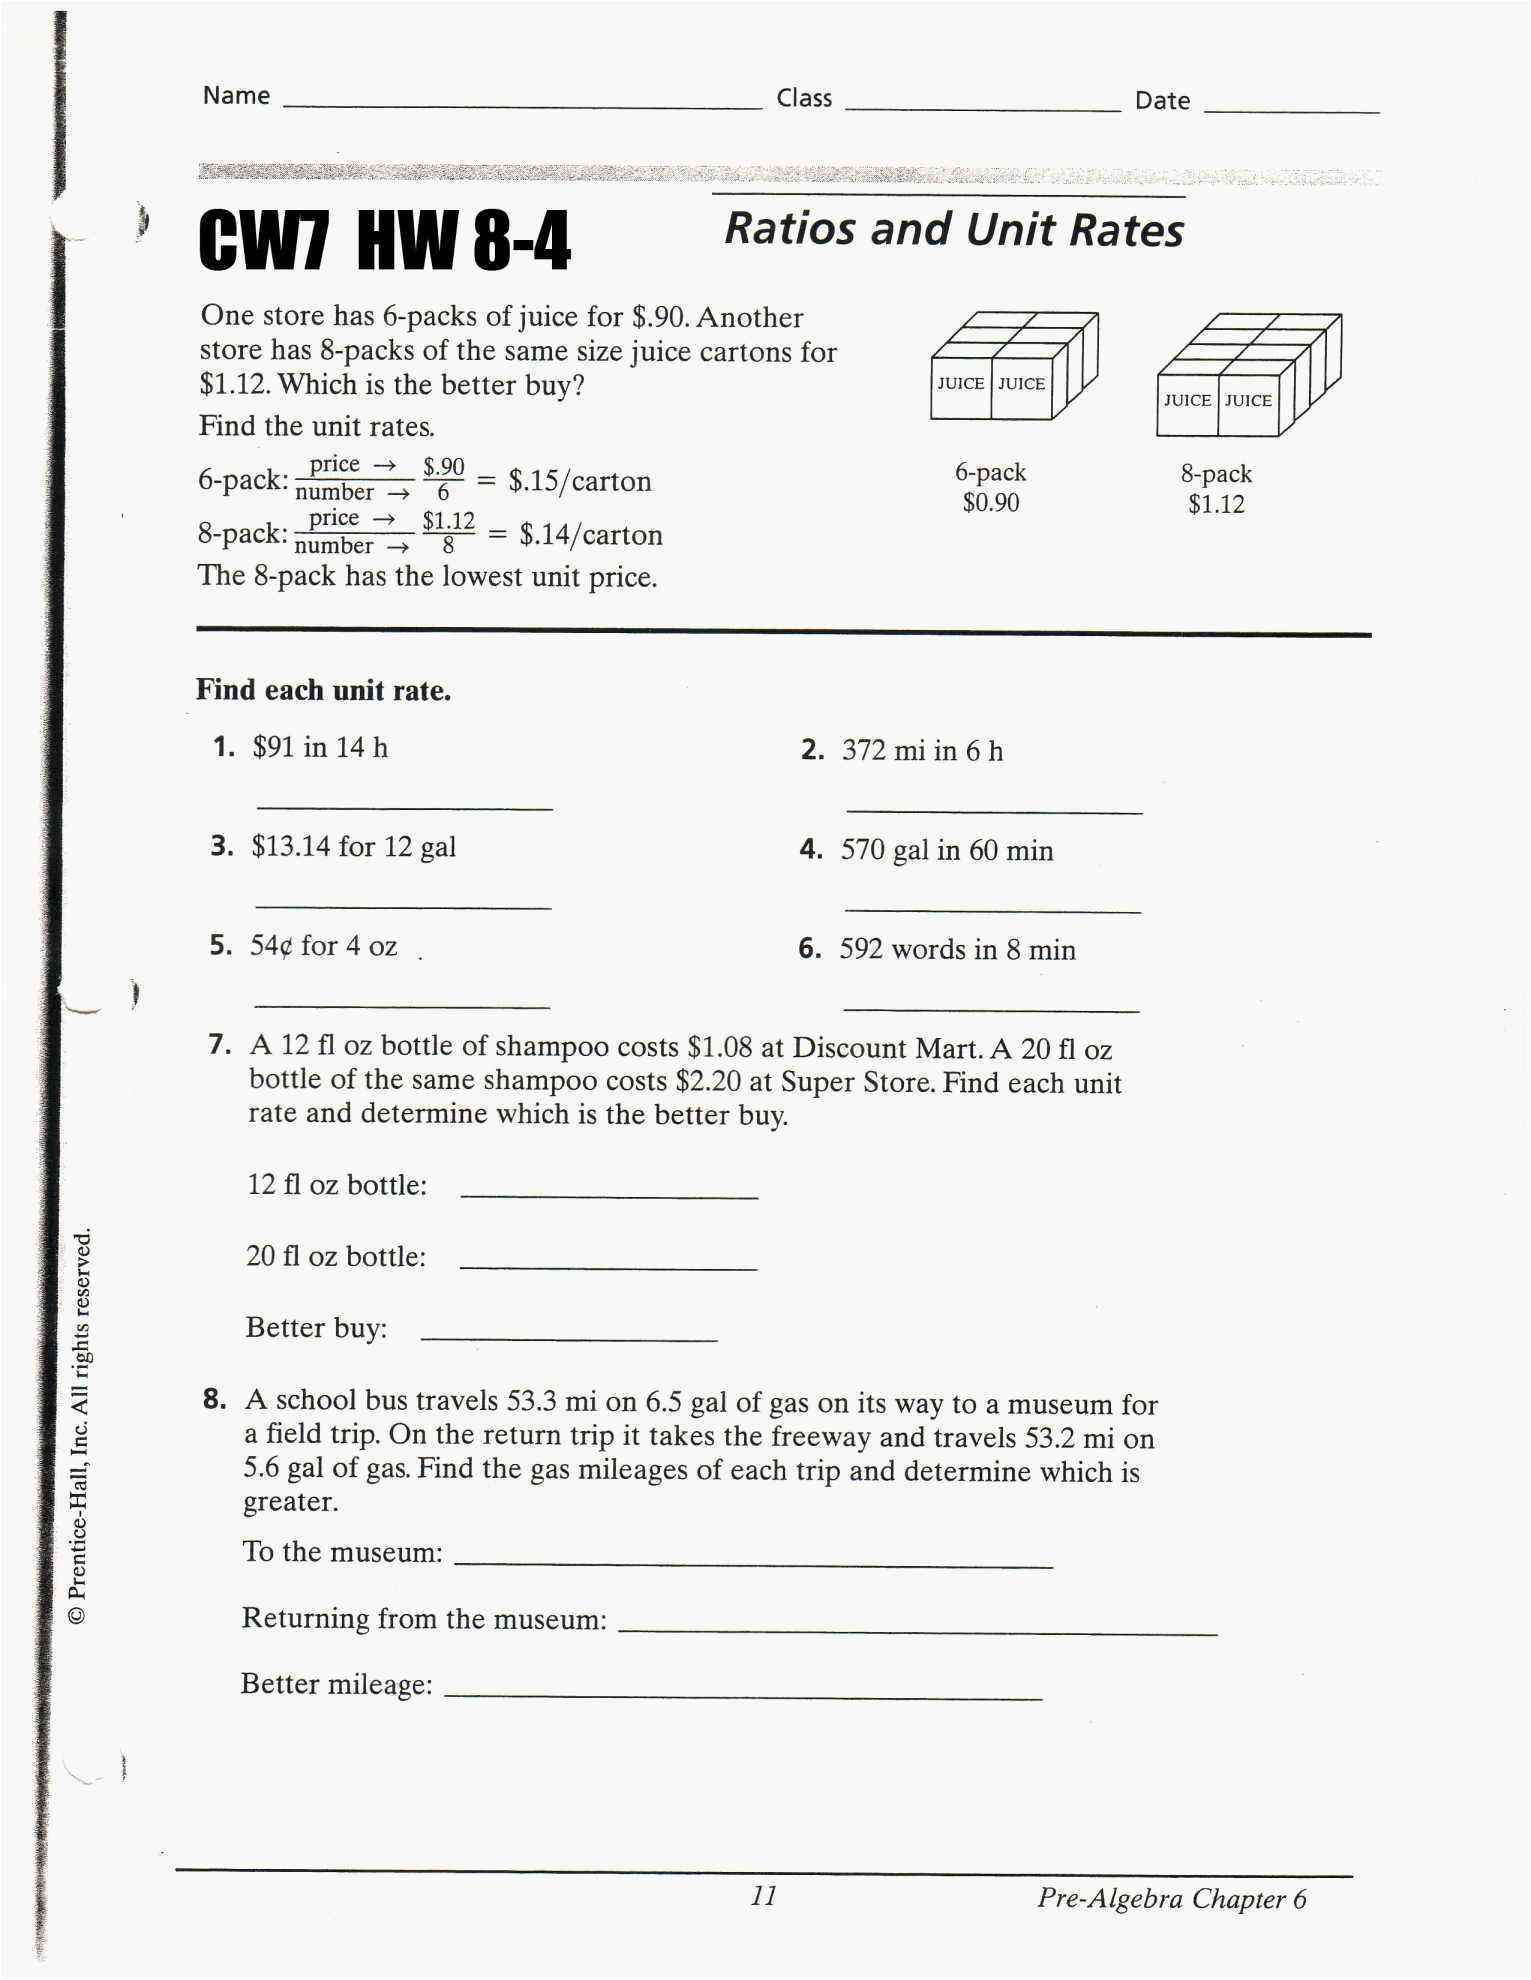 Aa Step 1 Worksheet together with 37 Awesome Time Management Template